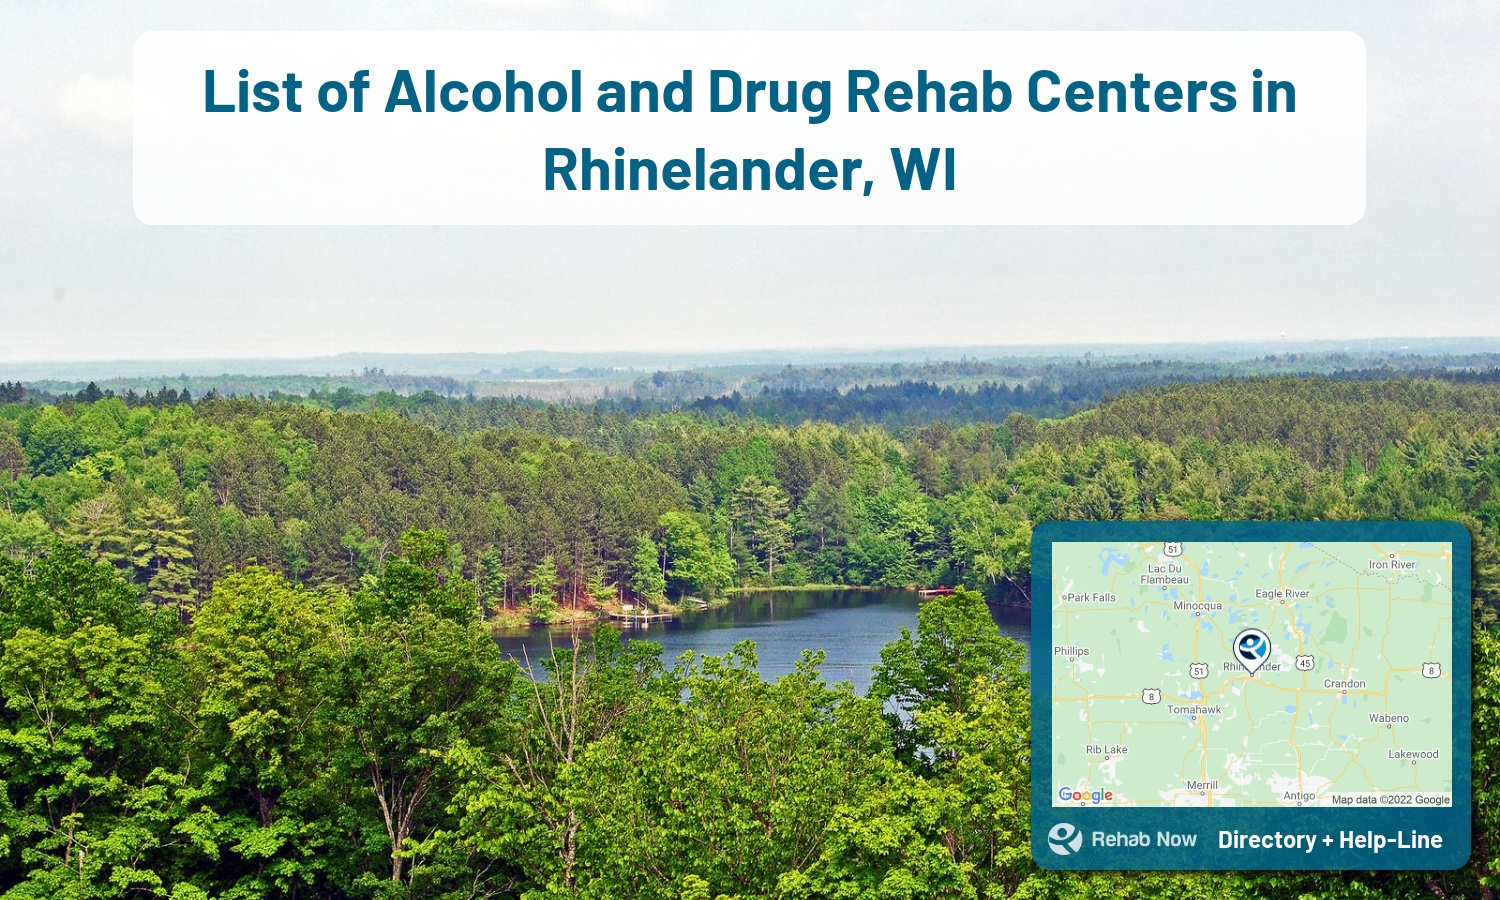 Rhinelander, WI Treatment Centers. Find drug rehab in Rhinelander, Wisconsin, or detox and treatment programs. Get the right help now!